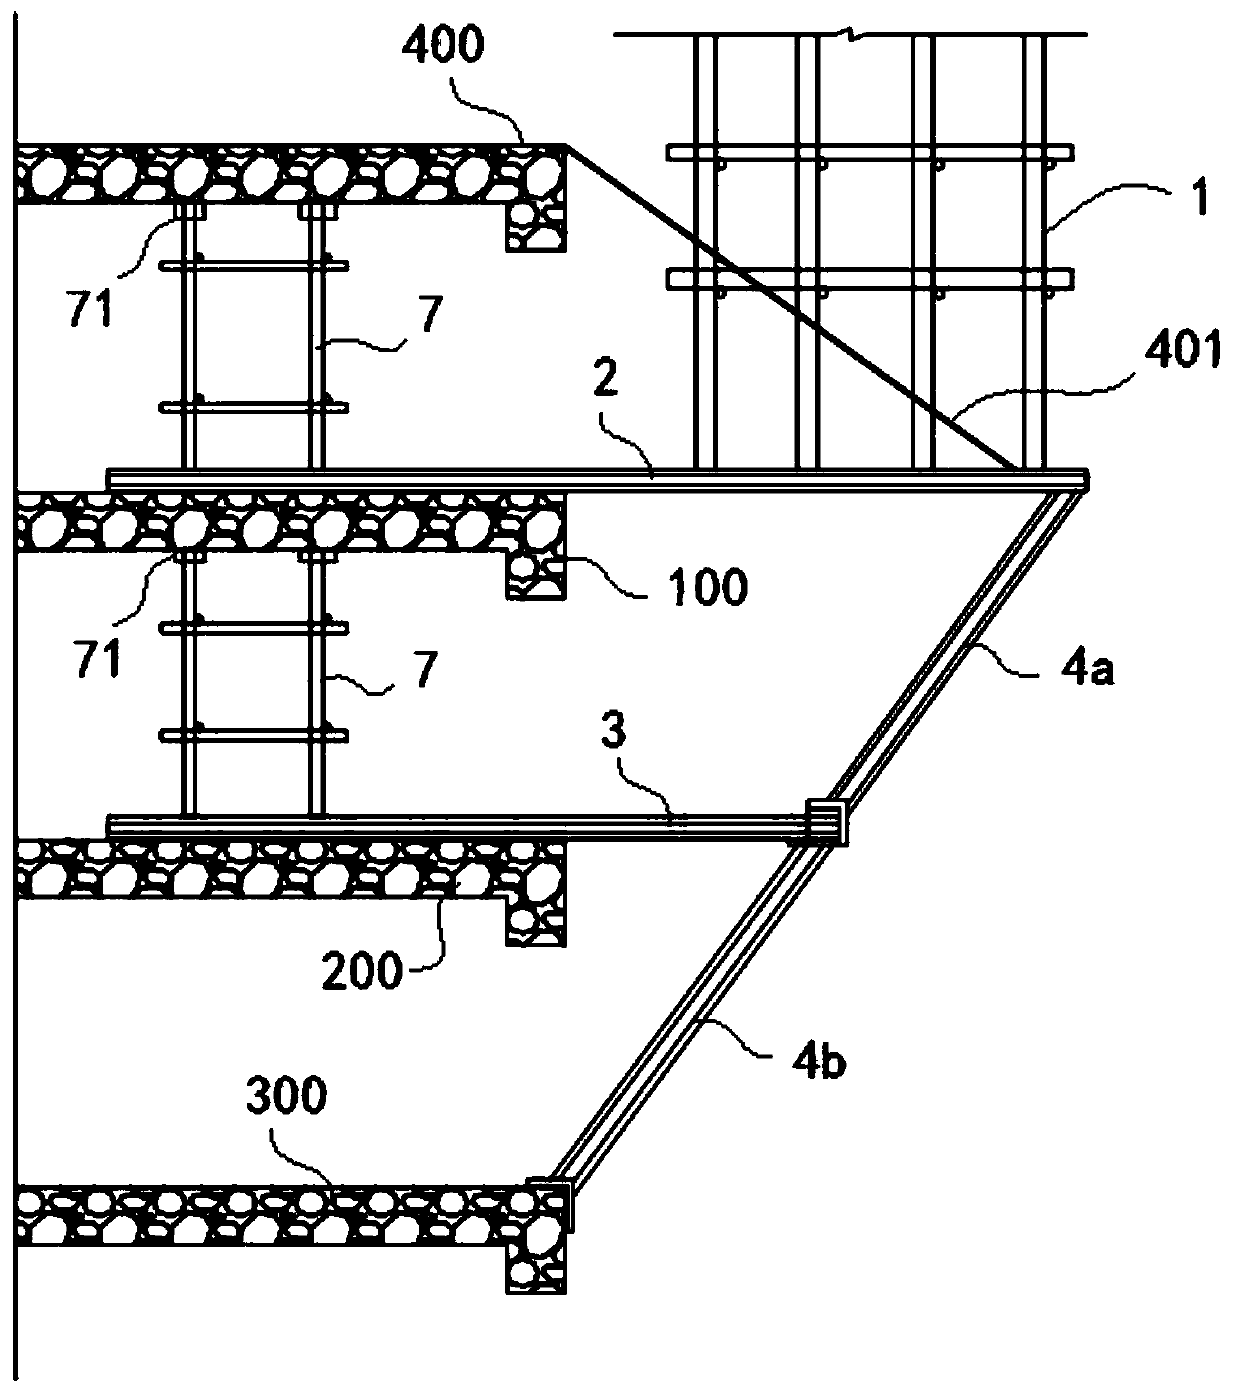 High-altitude cantilever high-supporting-formwork structure